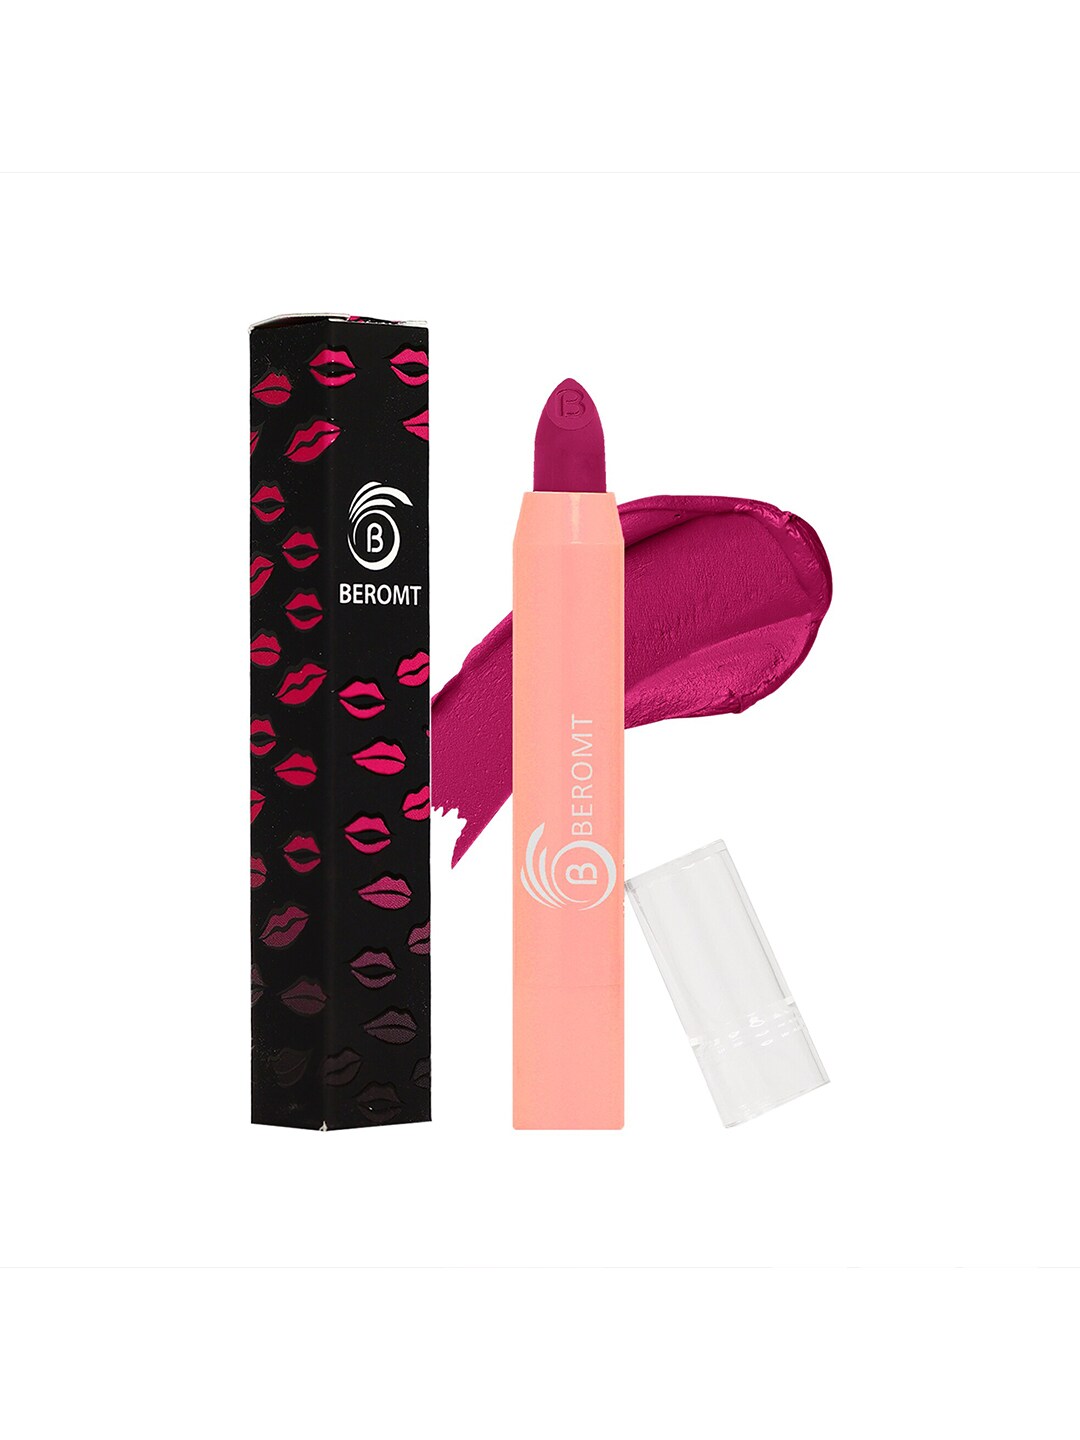 BEROMT Smudge Proof Perfect Pout Long-Lasting Matte Lip Crayon - Candy Land BLC08 Price in India